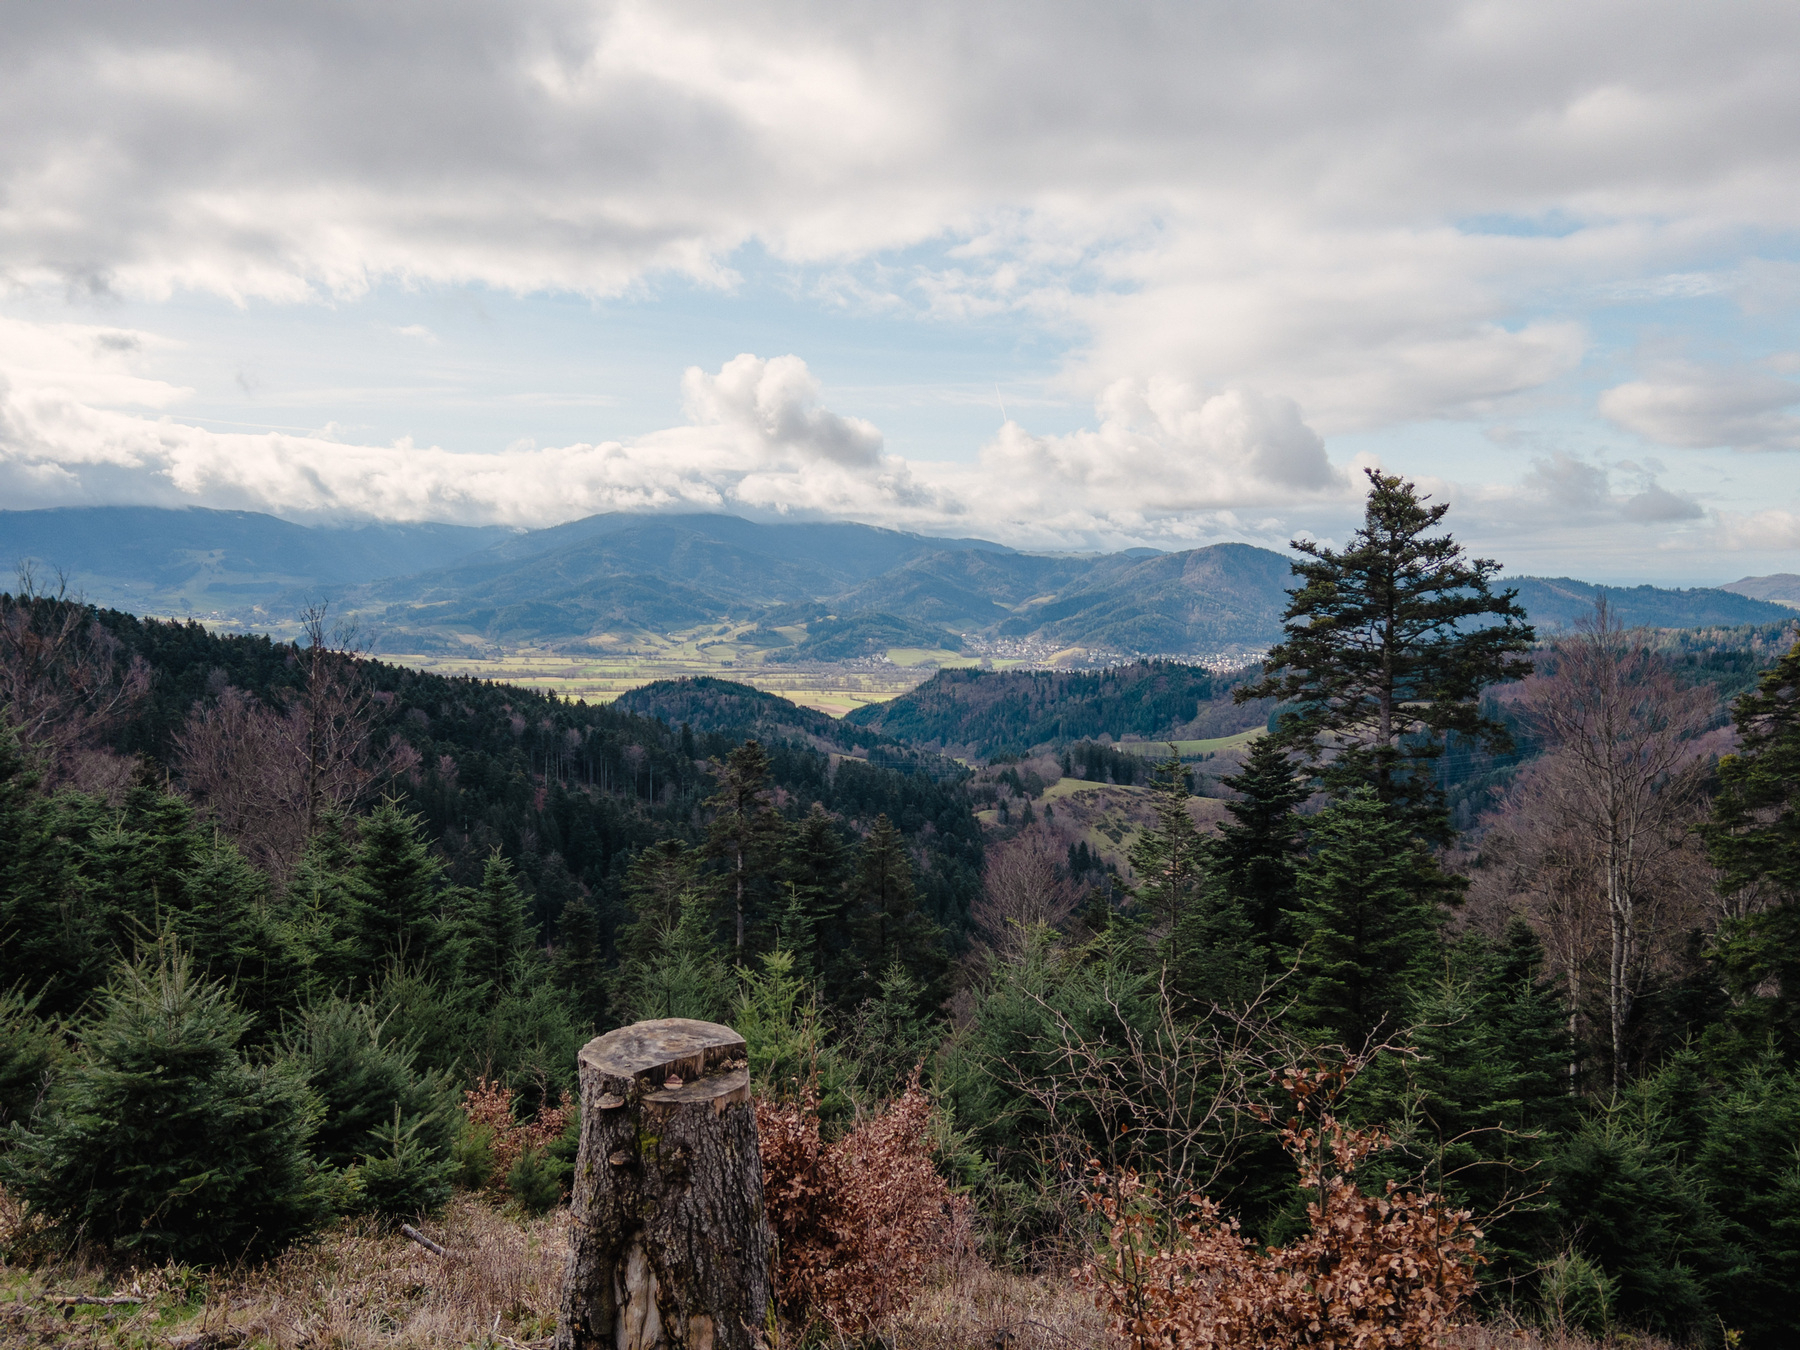 View from a forest path overlooking the a few tree-strewn hillsides and the Dreisamtal in the direction of Freiburg-Ebnet. The air is fairly clear with white and grey clouds starting at around 900 m of elevation.